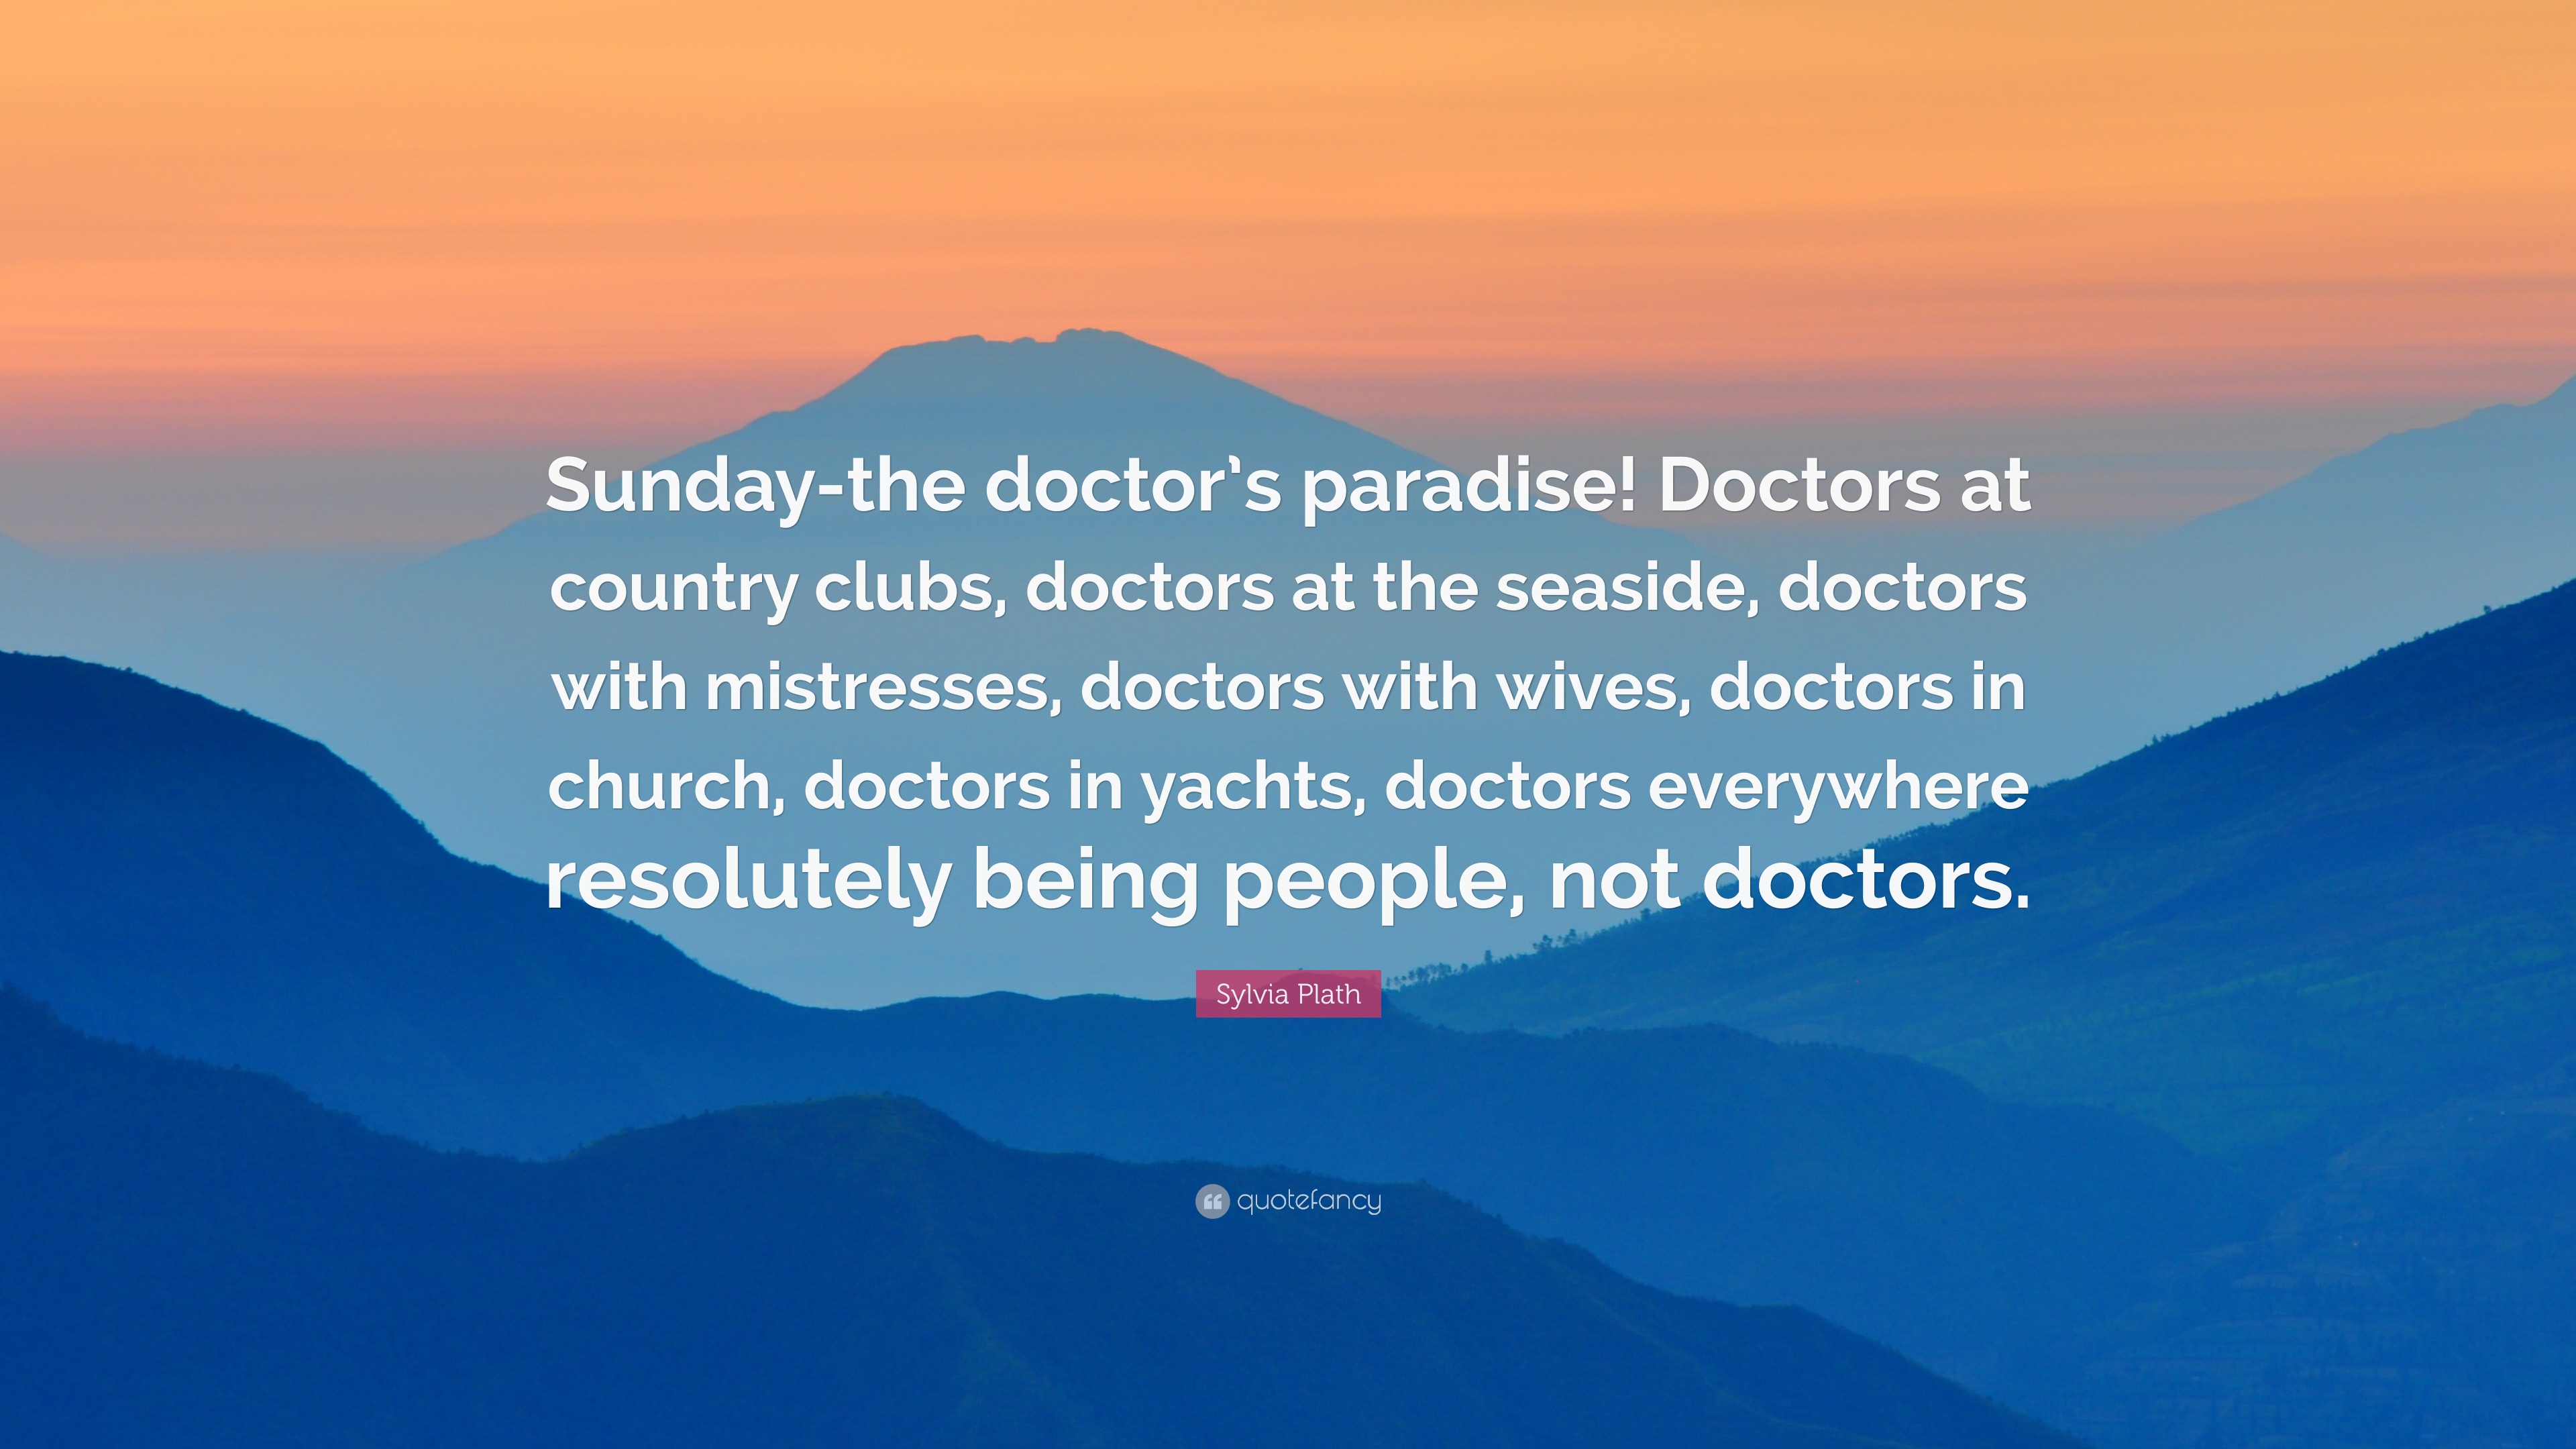 Sylvia Plath Quote: “Sunday The Doctor's Paradise! Doctors